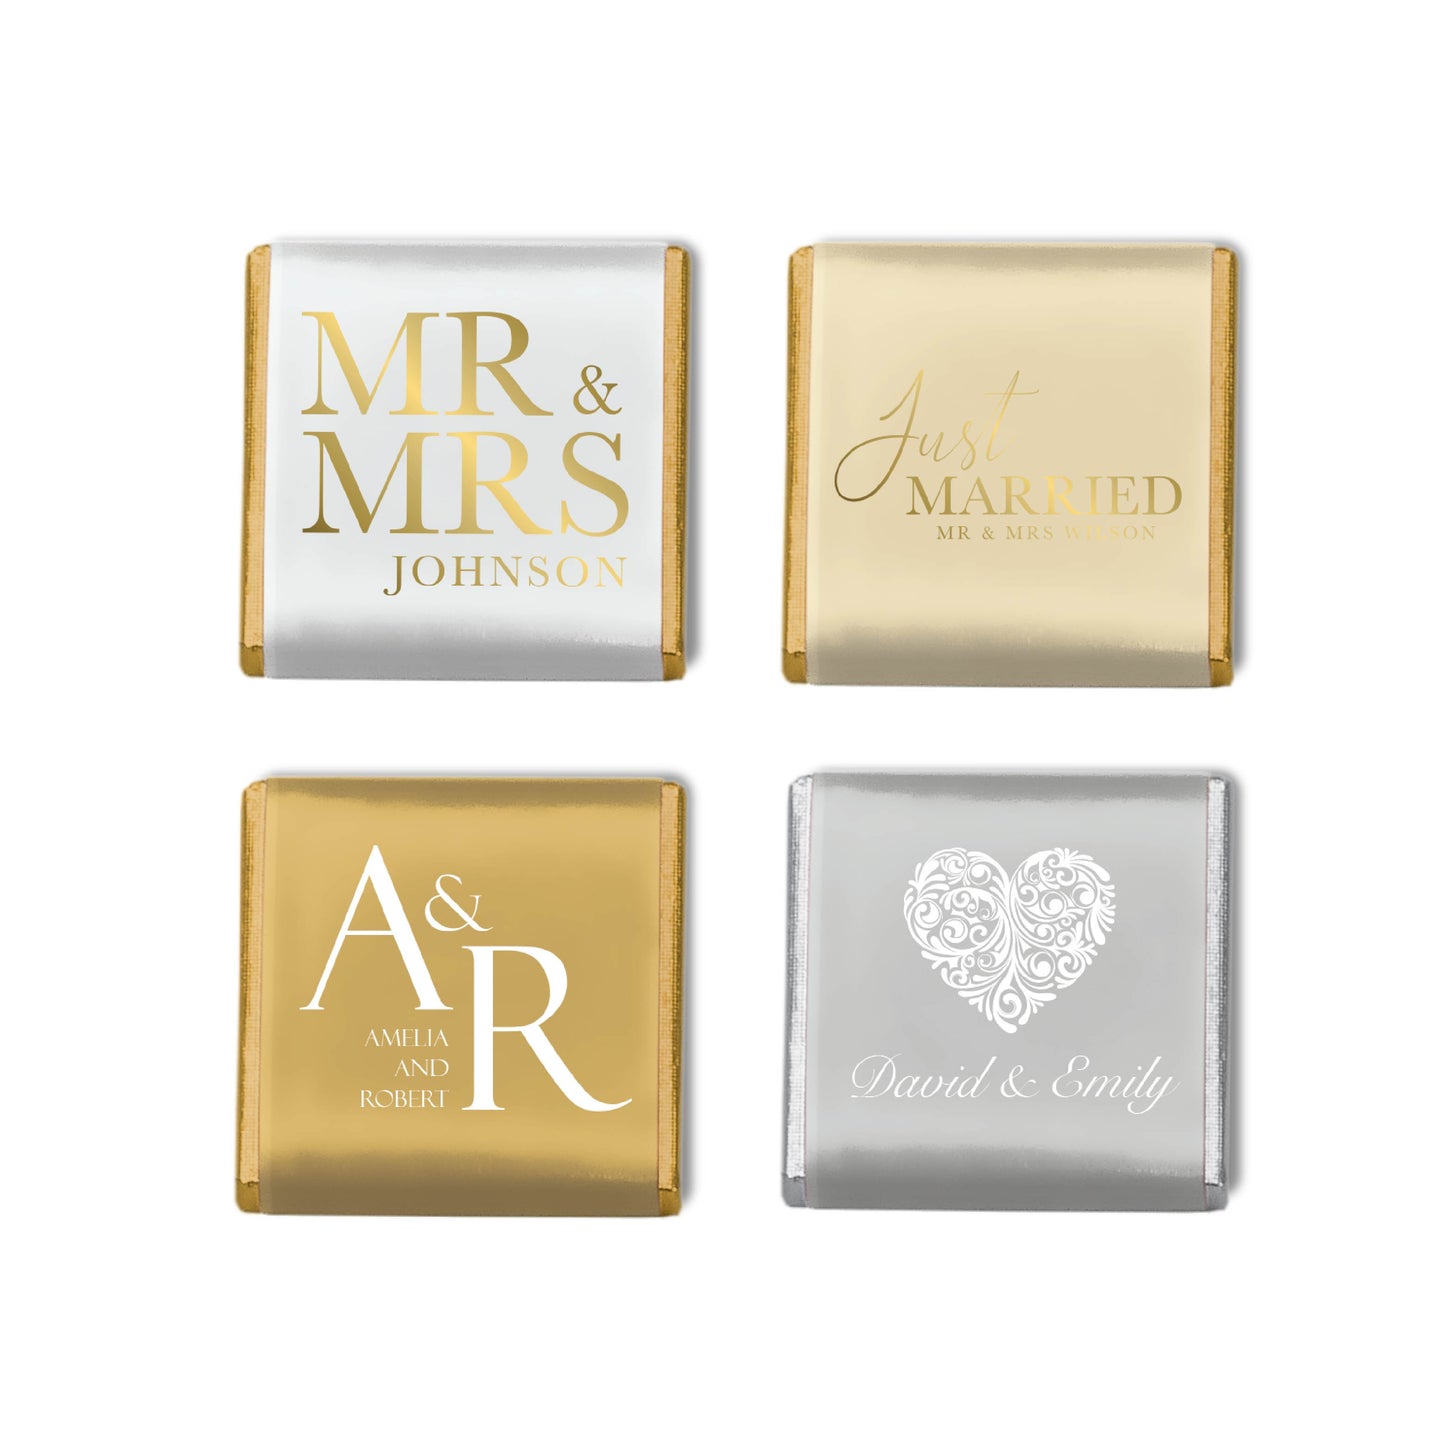 Personalised Wedding Chocolate Neapolitans, expertly crafted to add a unique touch to your celebration